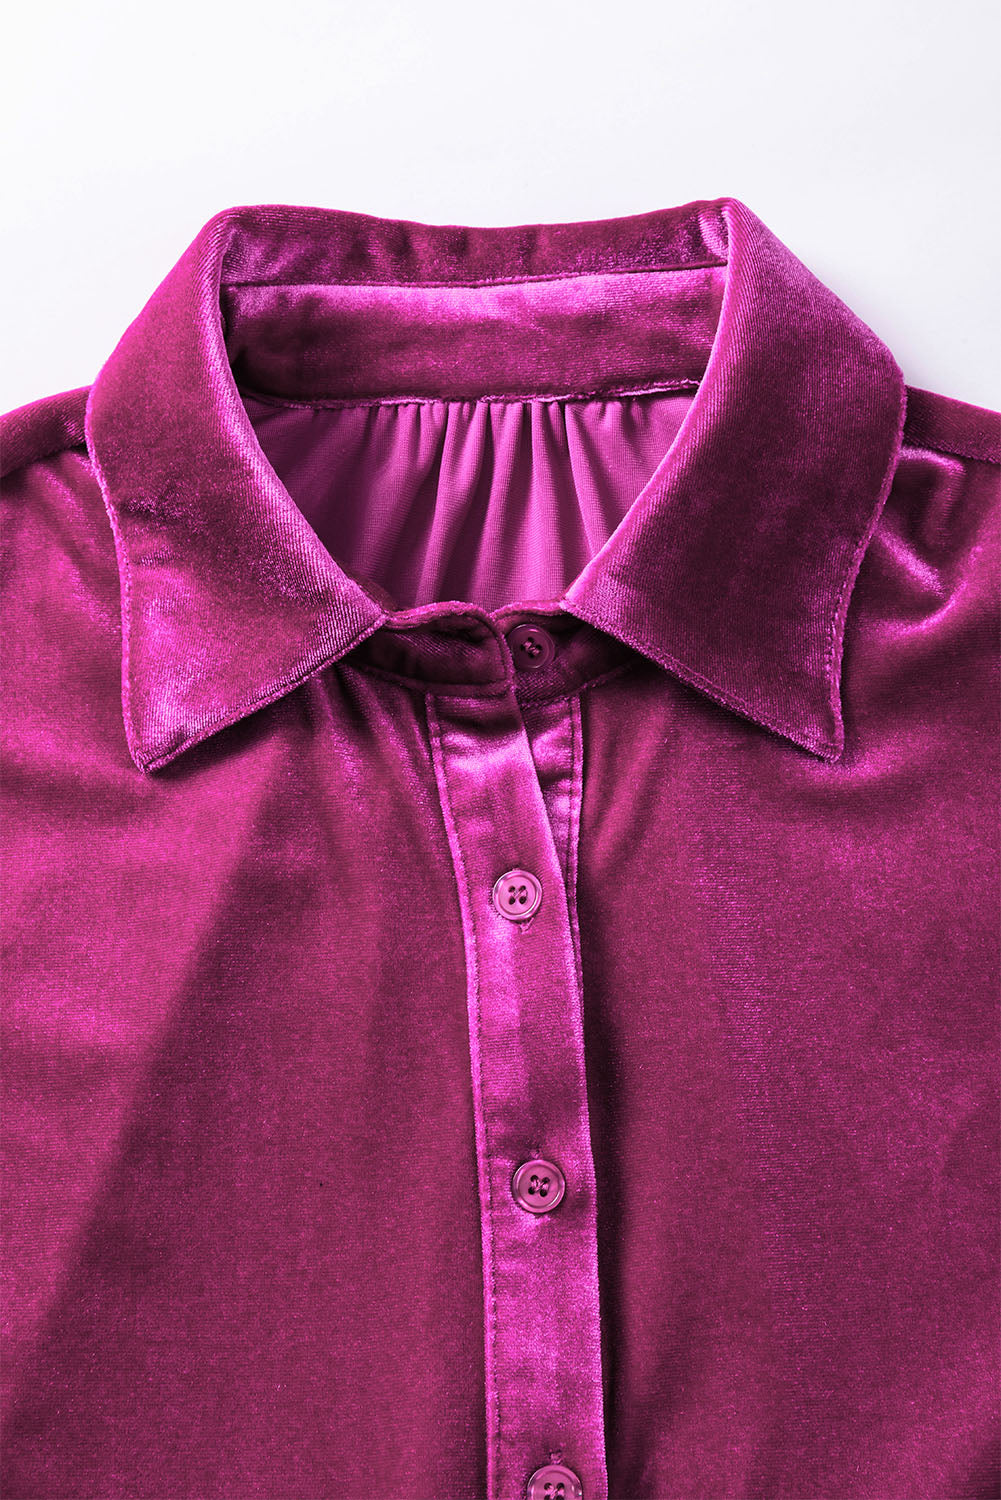 a close up of a purple shirt on a white surface